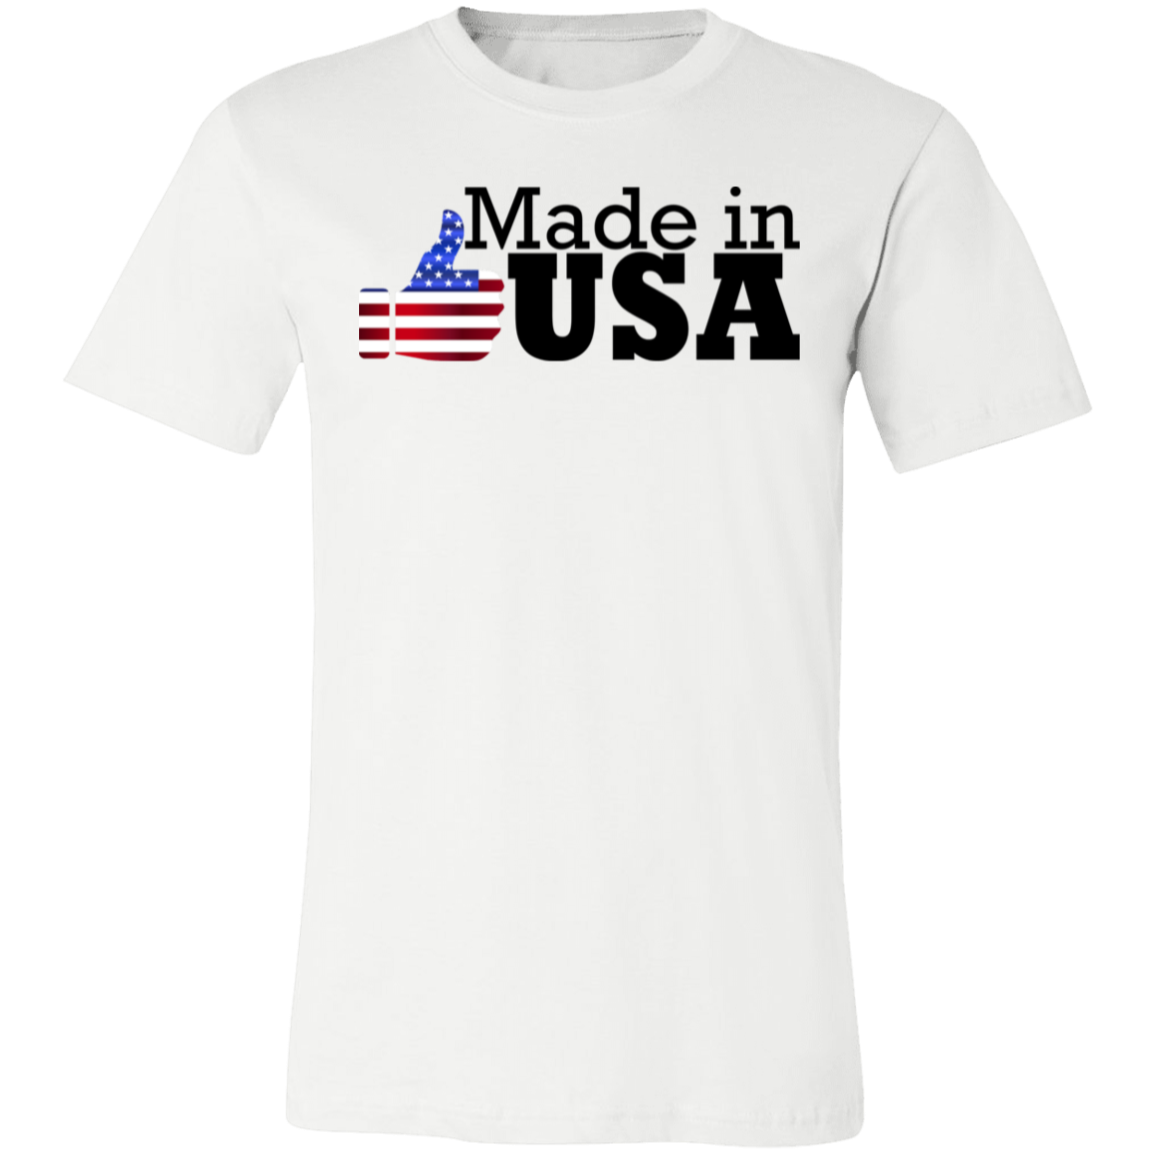 Made in USA Thumbs Up Jersey Short-Sleeve T-Shirt